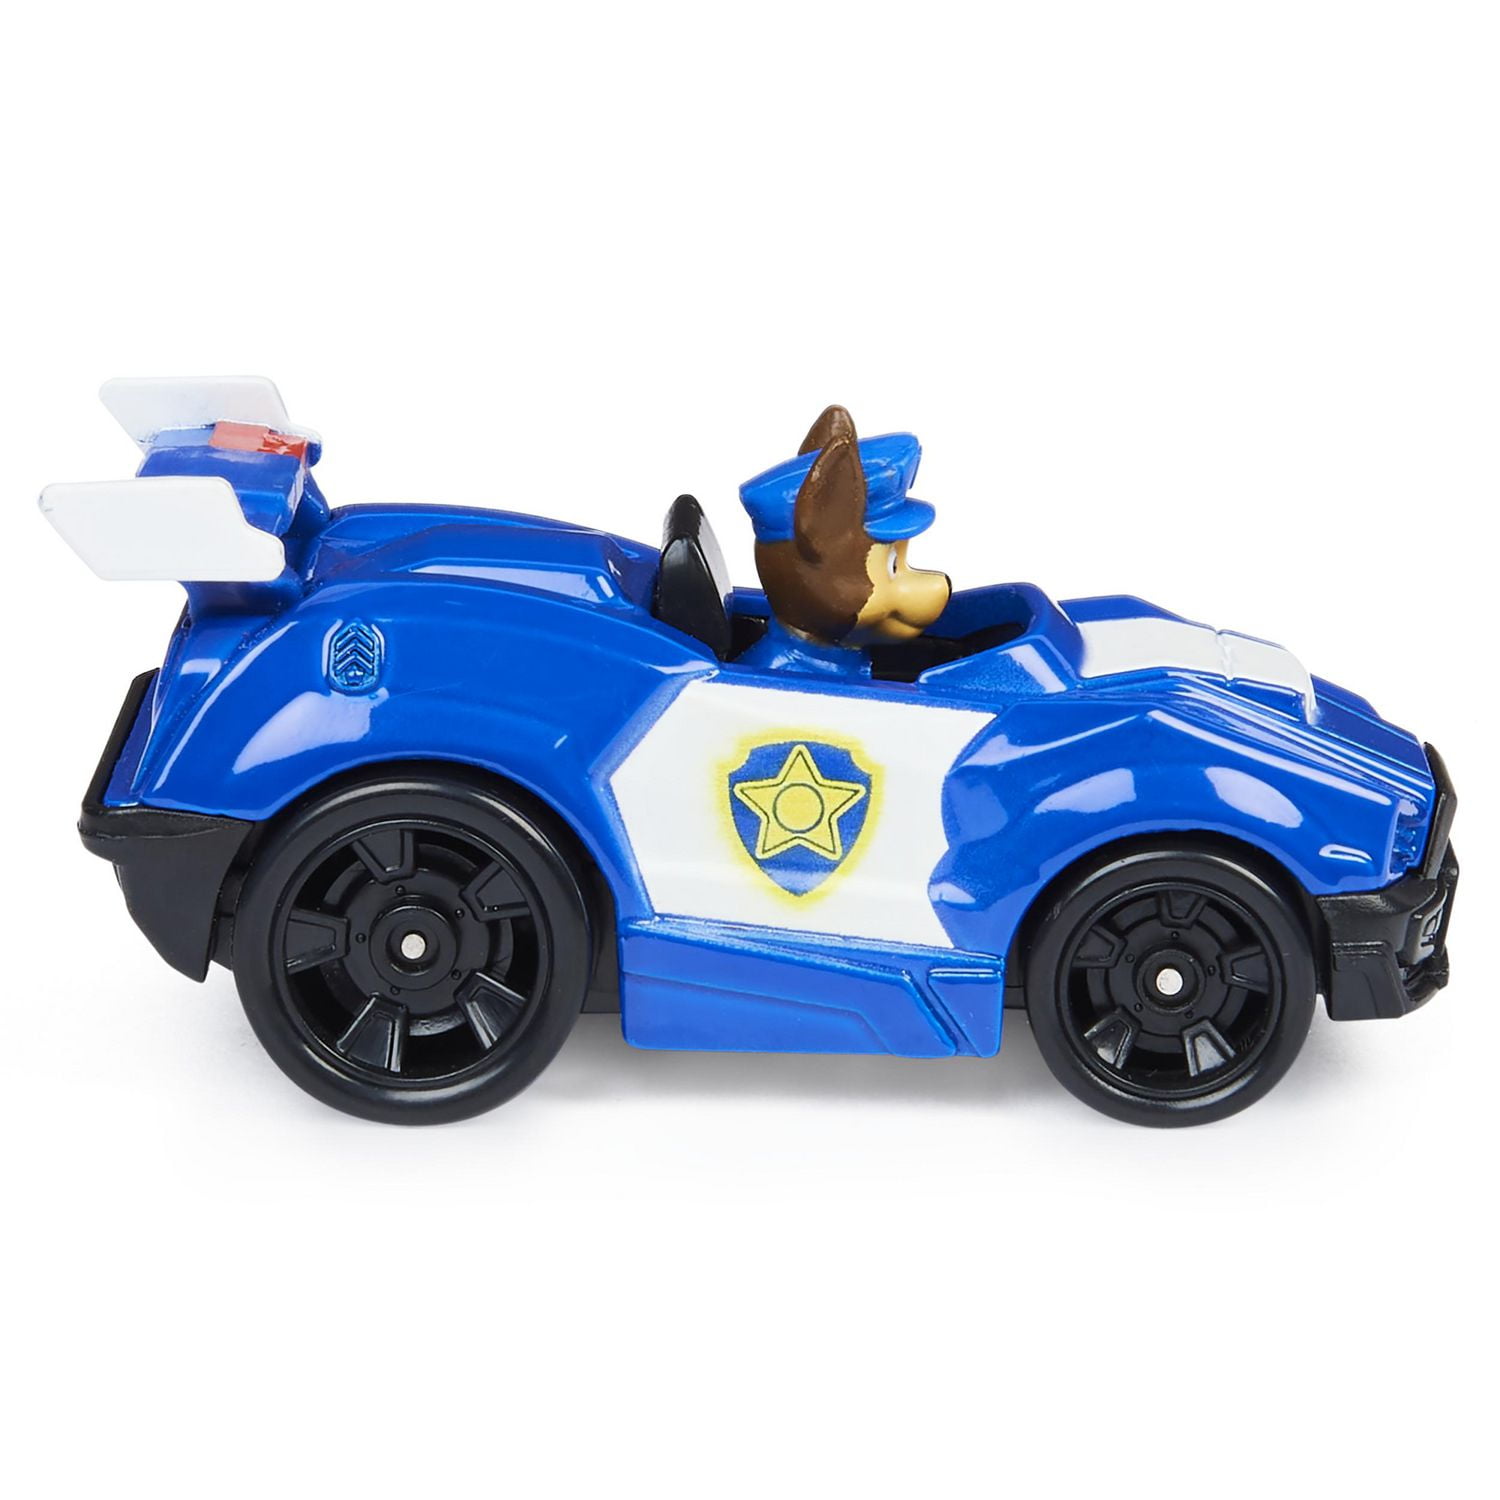 Up To 50% Off on Boys Cars, Paw Patrol, Mickey